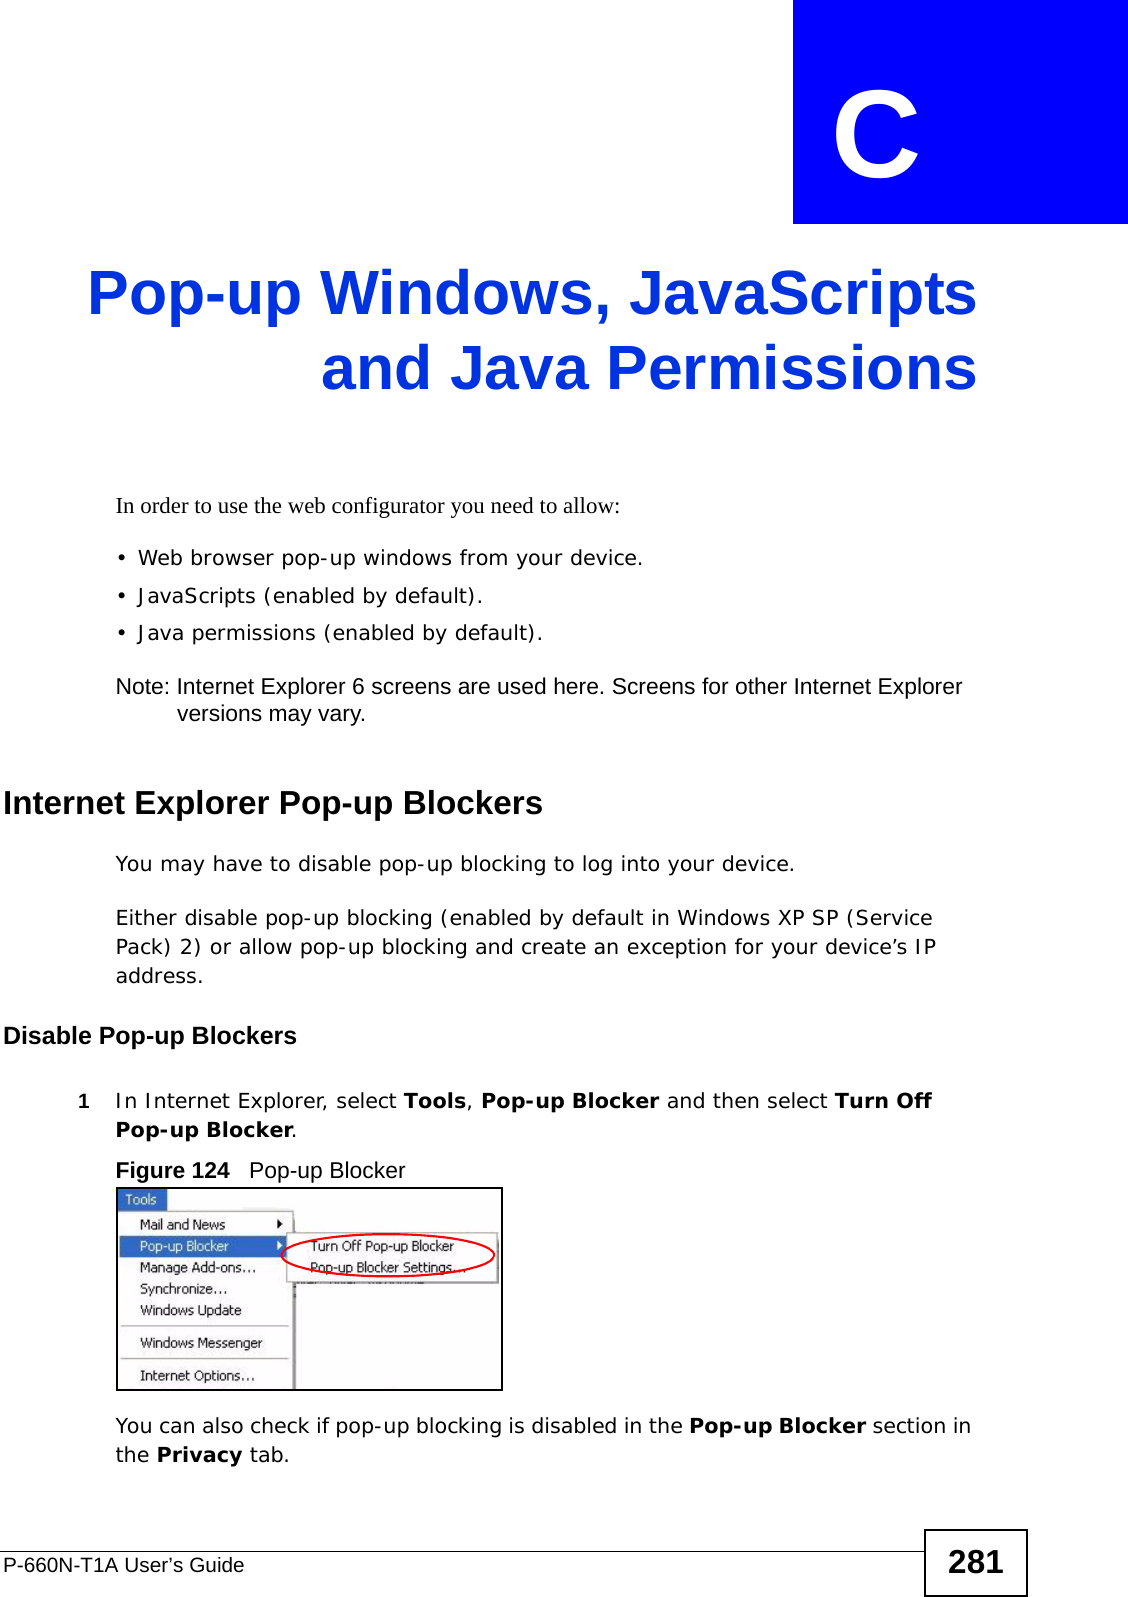 P-660N-T1A User’s Guide 281APPENDIX  C Pop-up Windows, JavaScriptsand Java PermissionsIn order to use the web configurator you need to allow:• Web browser pop-up windows from your device.• JavaScripts (enabled by default).• Java permissions (enabled by default).Note: Internet Explorer 6 screens are used here. Screens for other Internet Explorer versions may vary.Internet Explorer Pop-up BlockersYou may have to disable pop-up blocking to log into your device. Either disable pop-up blocking (enabled by default in Windows XP SP (Service Pack) 2) or allow pop-up blocking and create an exception for your device’s IP address.Disable Pop-up Blockers1In Internet Explorer, select Tools, Pop-up Blocker and then select Turn Off Pop-up Blocker. Figure 124   Pop-up BlockerYou can also check if pop-up blocking is disabled in the Pop-up Blocker section in the Privacy tab. 